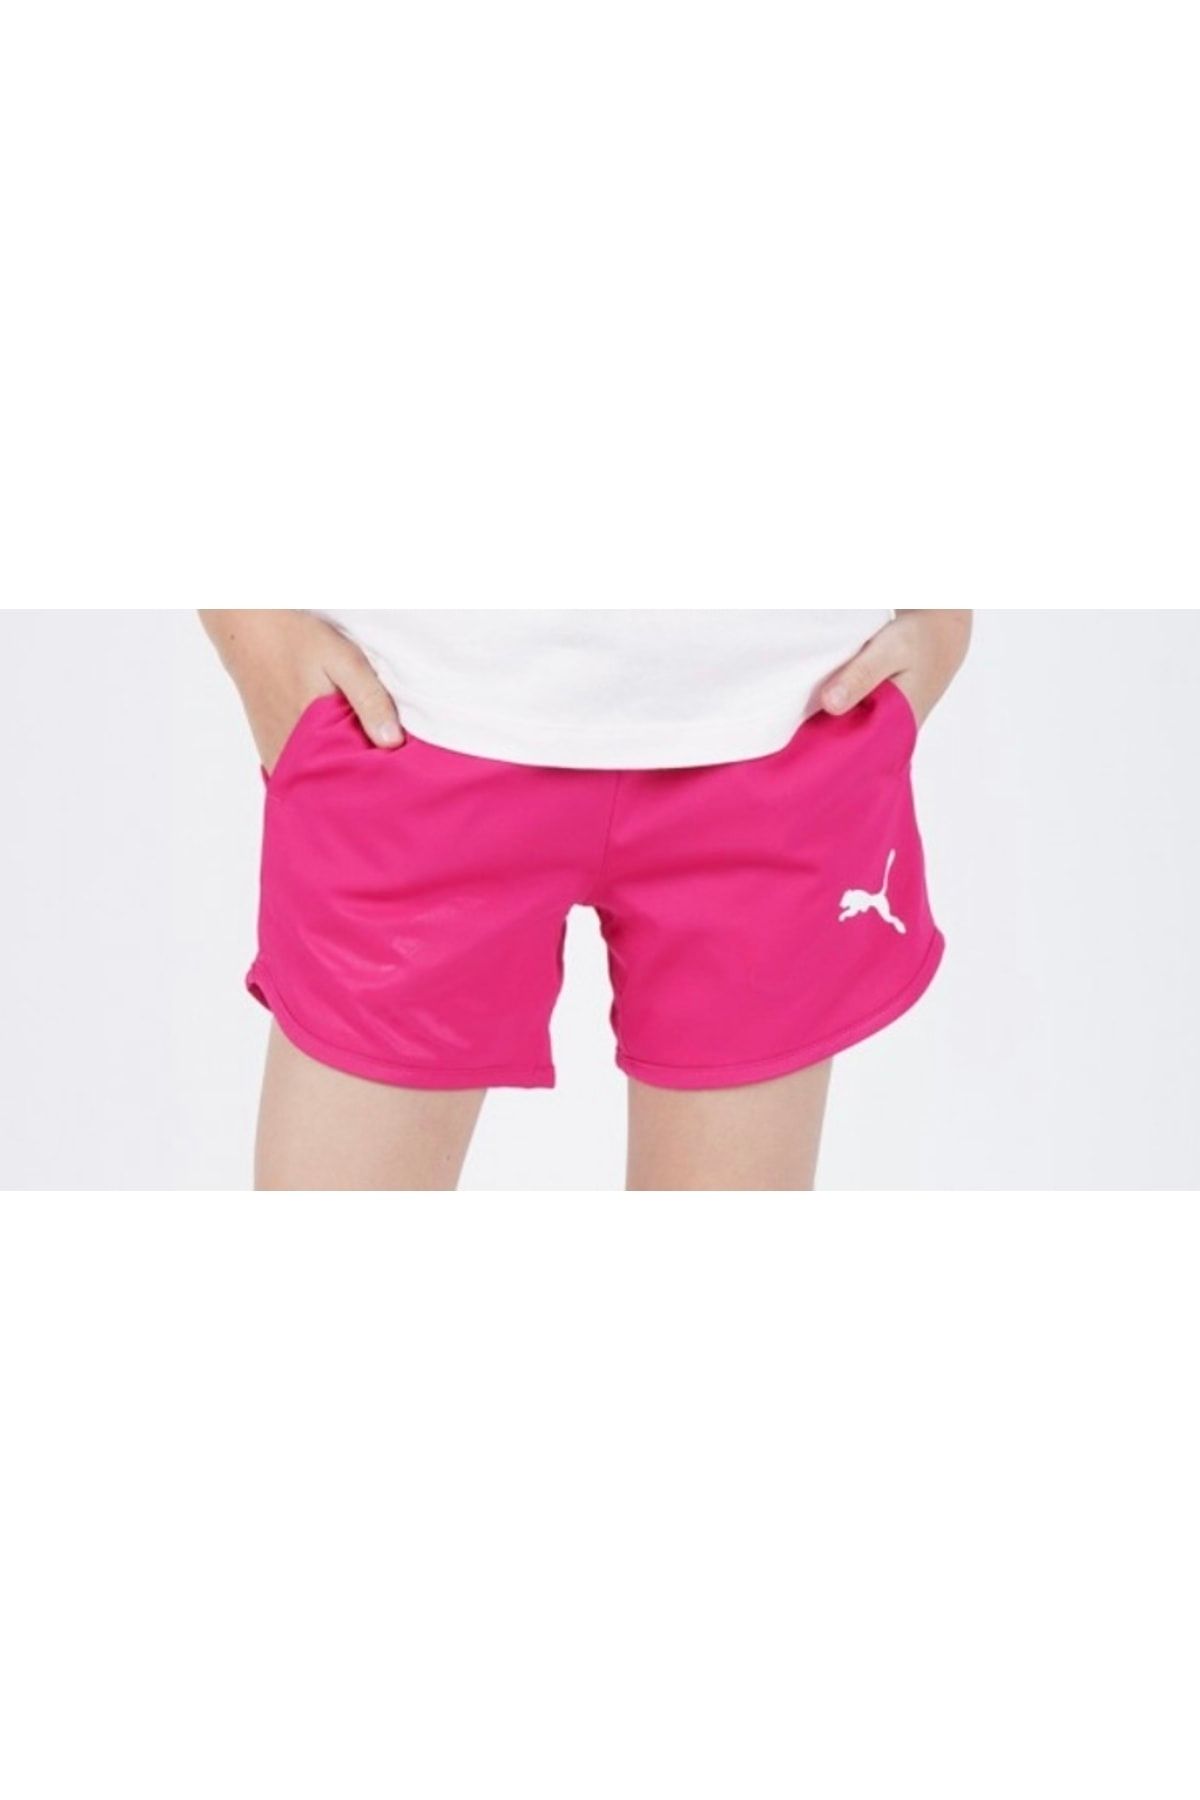 Puma Girl's Polyester Casual Shorts (85175115_BRİGHT ROSE_13-14 YEARS),